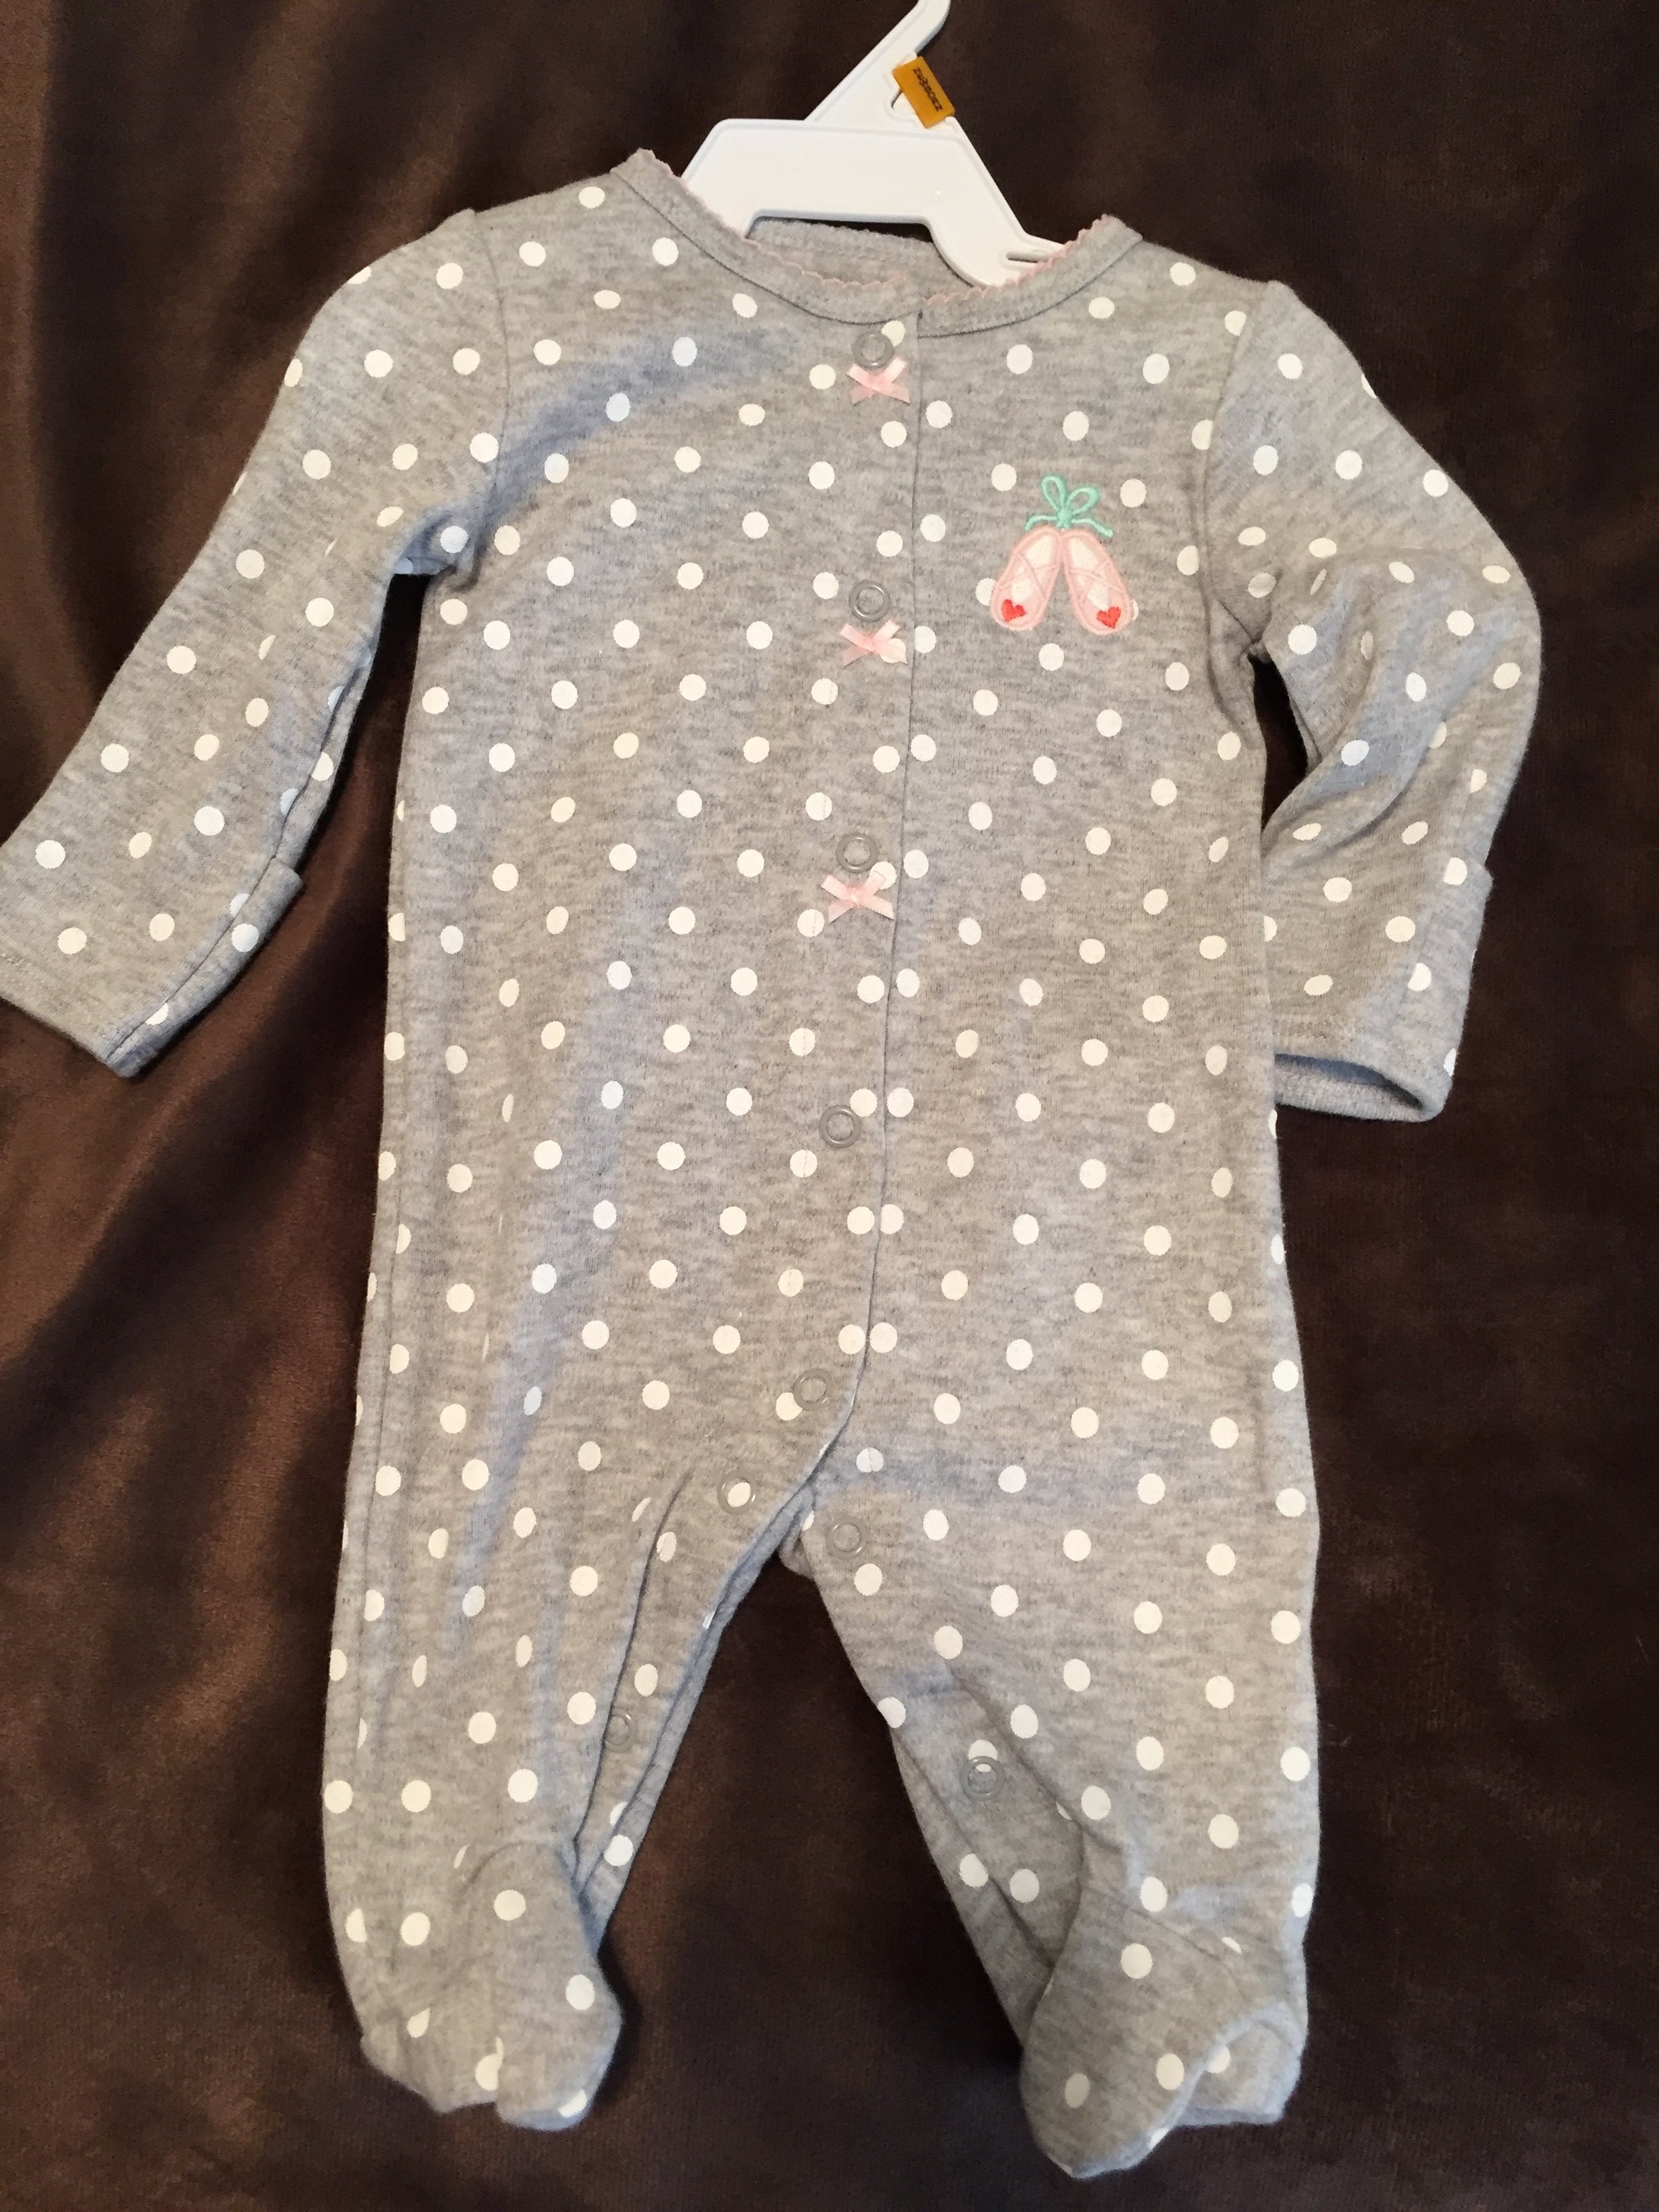 ISO preemie boy clothes - For Sale/Wanted - Bountiful Baby Customer Forum